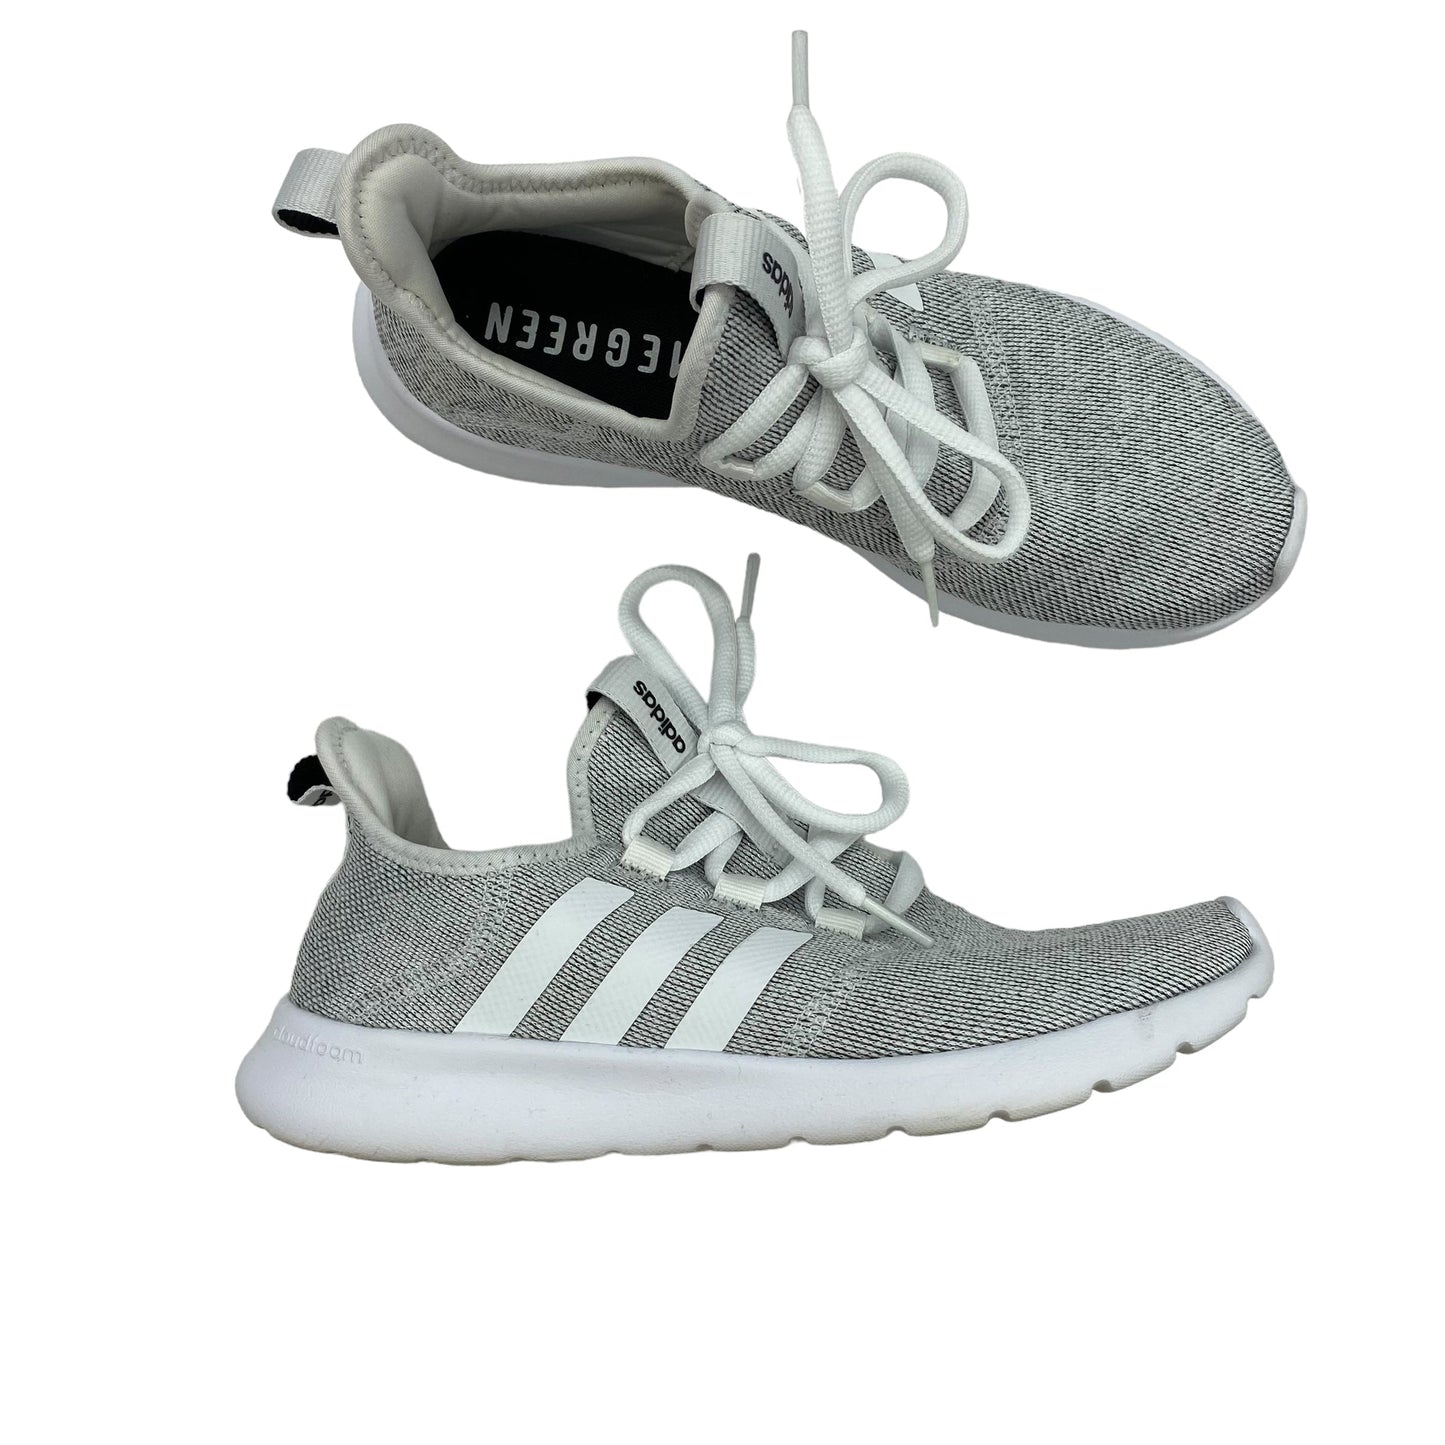 GREY SHOES ATHLETIC by ADIDAS Size:7.5